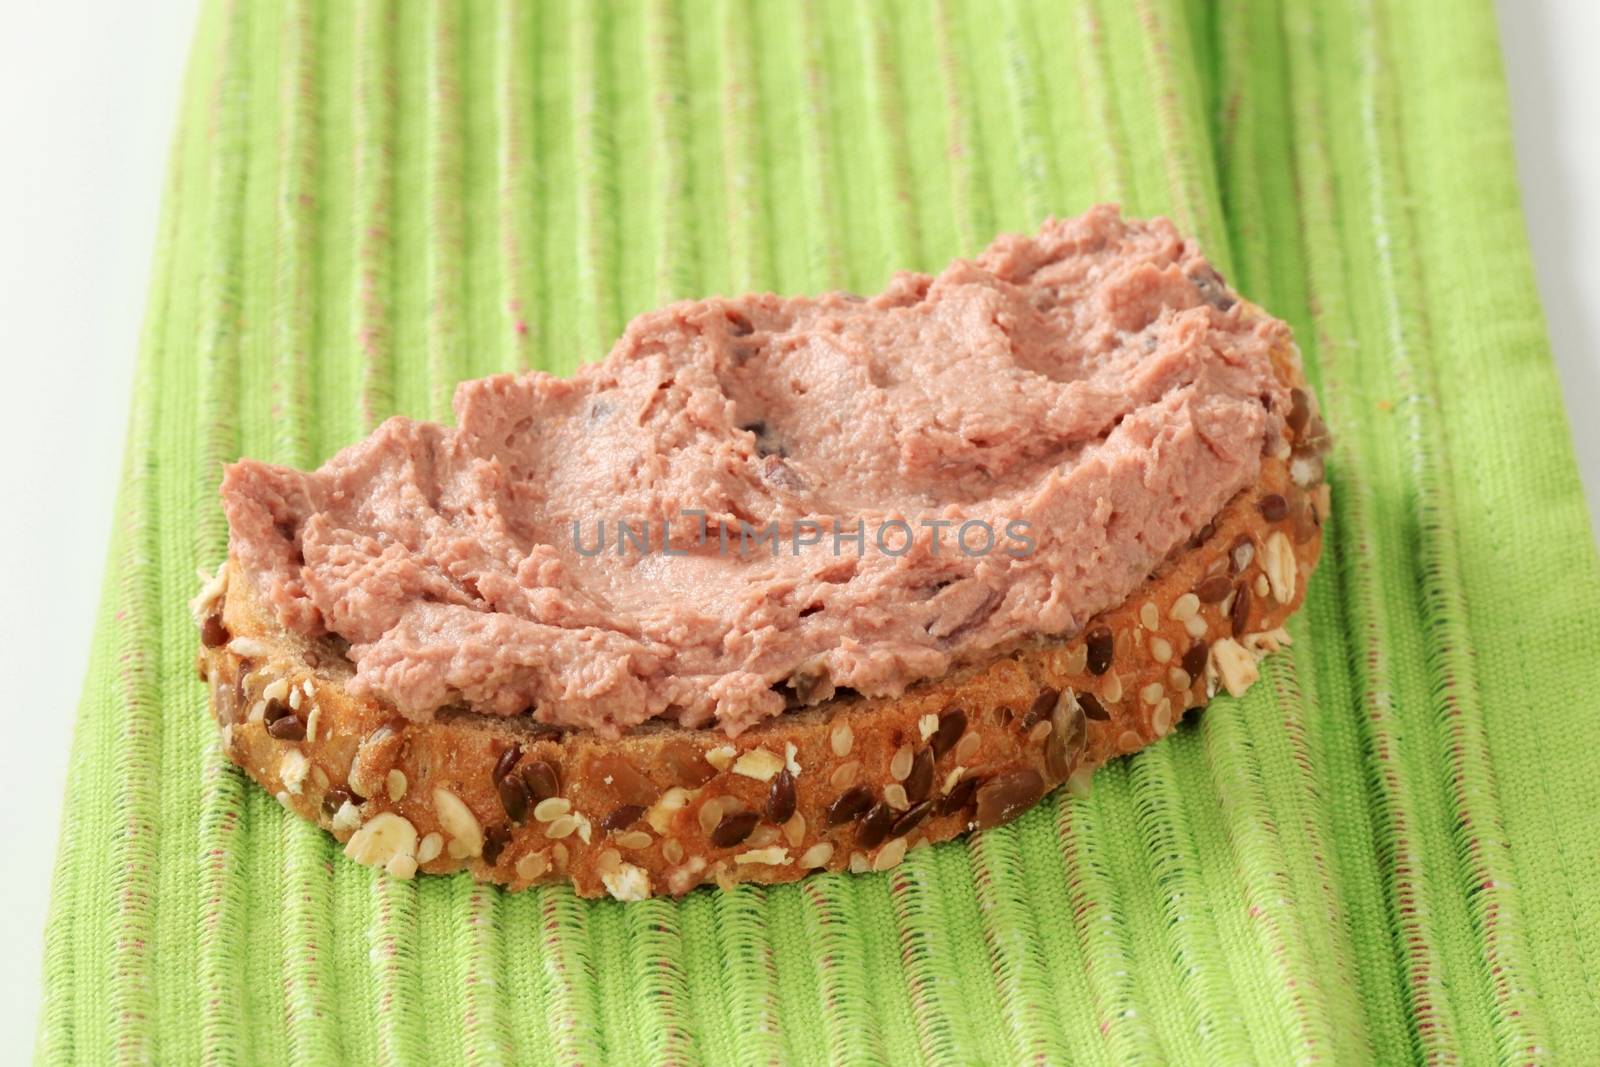 Slice of bread roll and liver pate